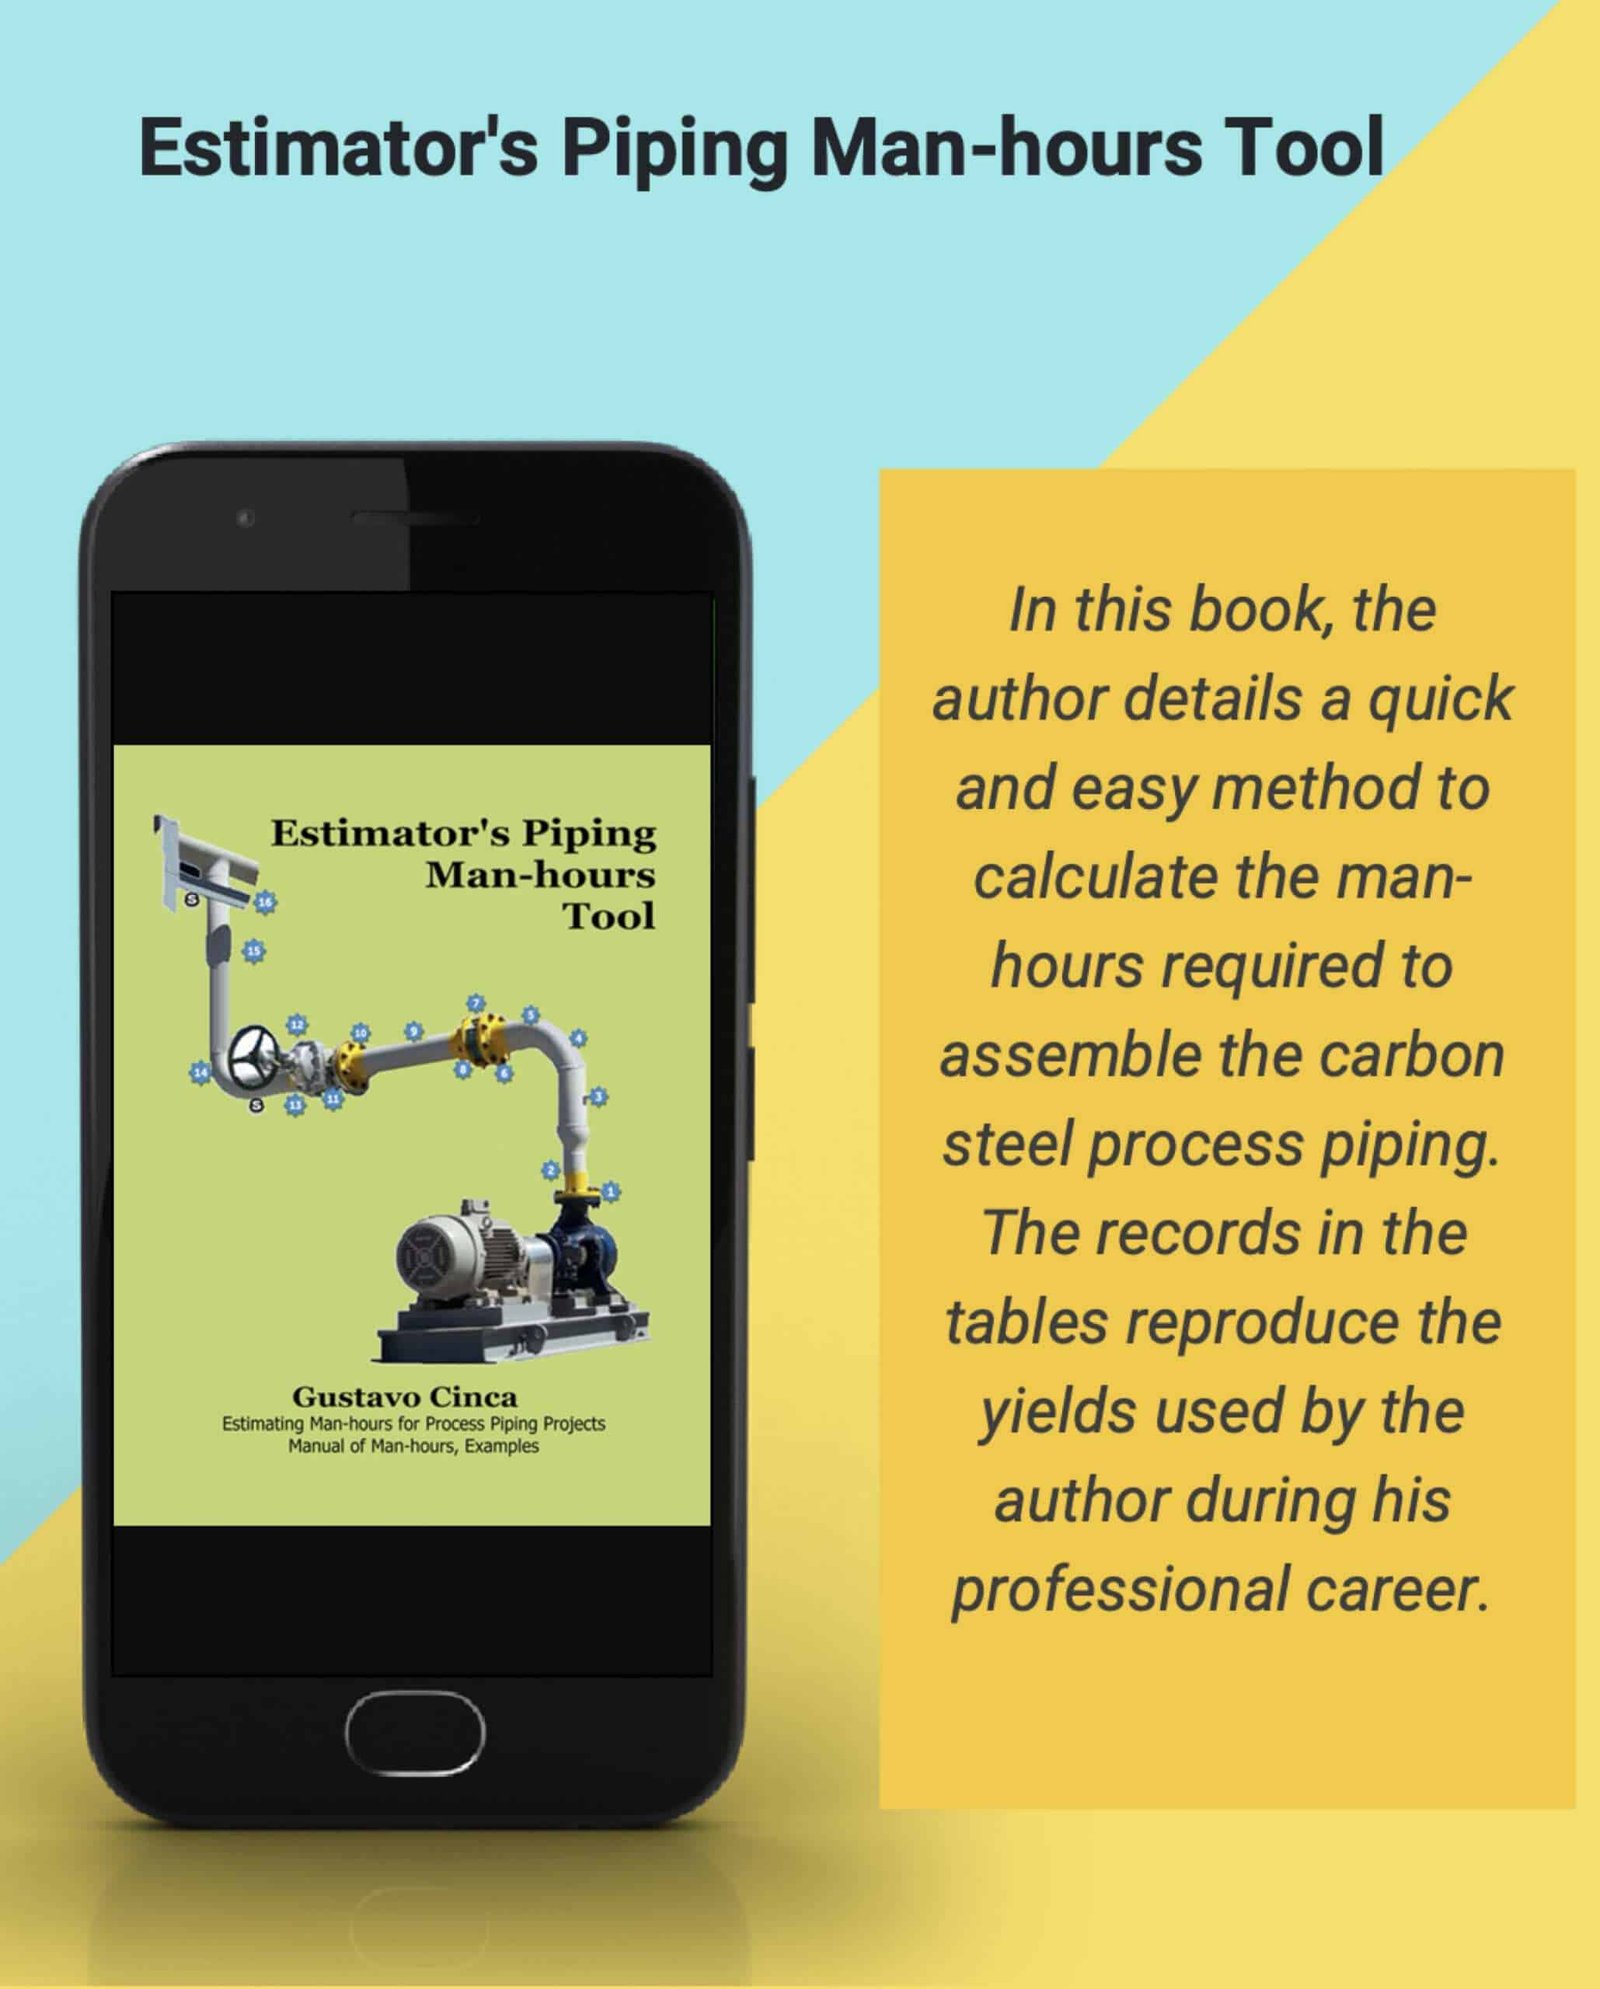 Estimator's Piping Man-hours Tool for carbon Steel Process Piping Projects. Gustavo Cinca eBooks - Calculate man hours